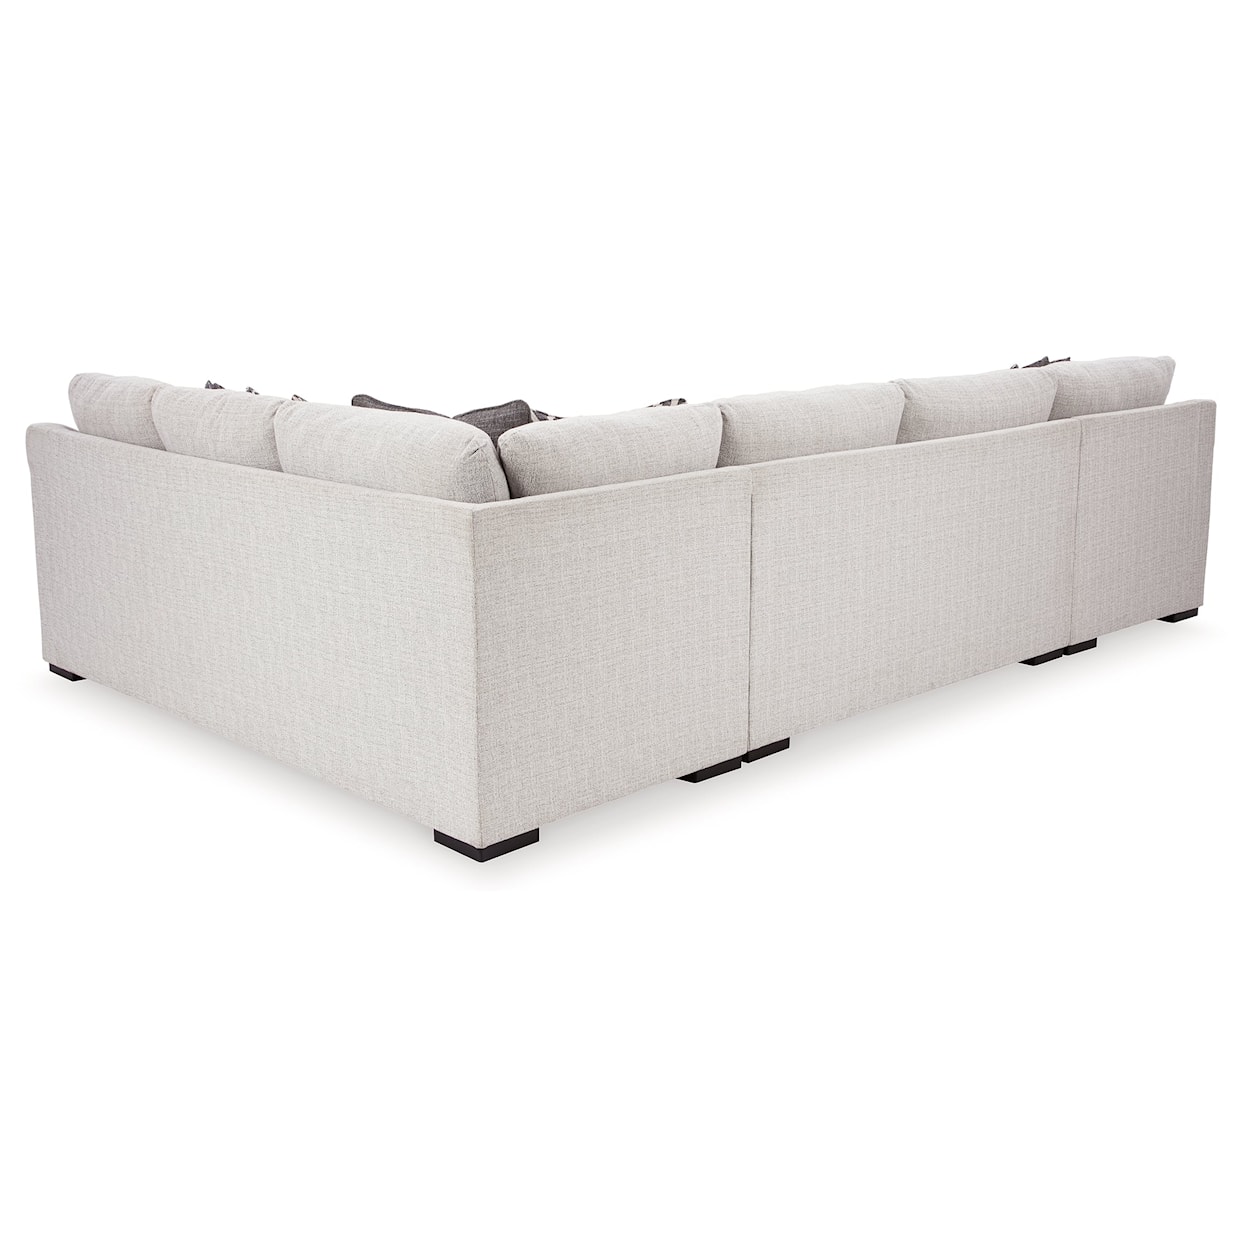 Ashley Furniture Benchcraft Koralynn 3-Piece Sectional With Chaise